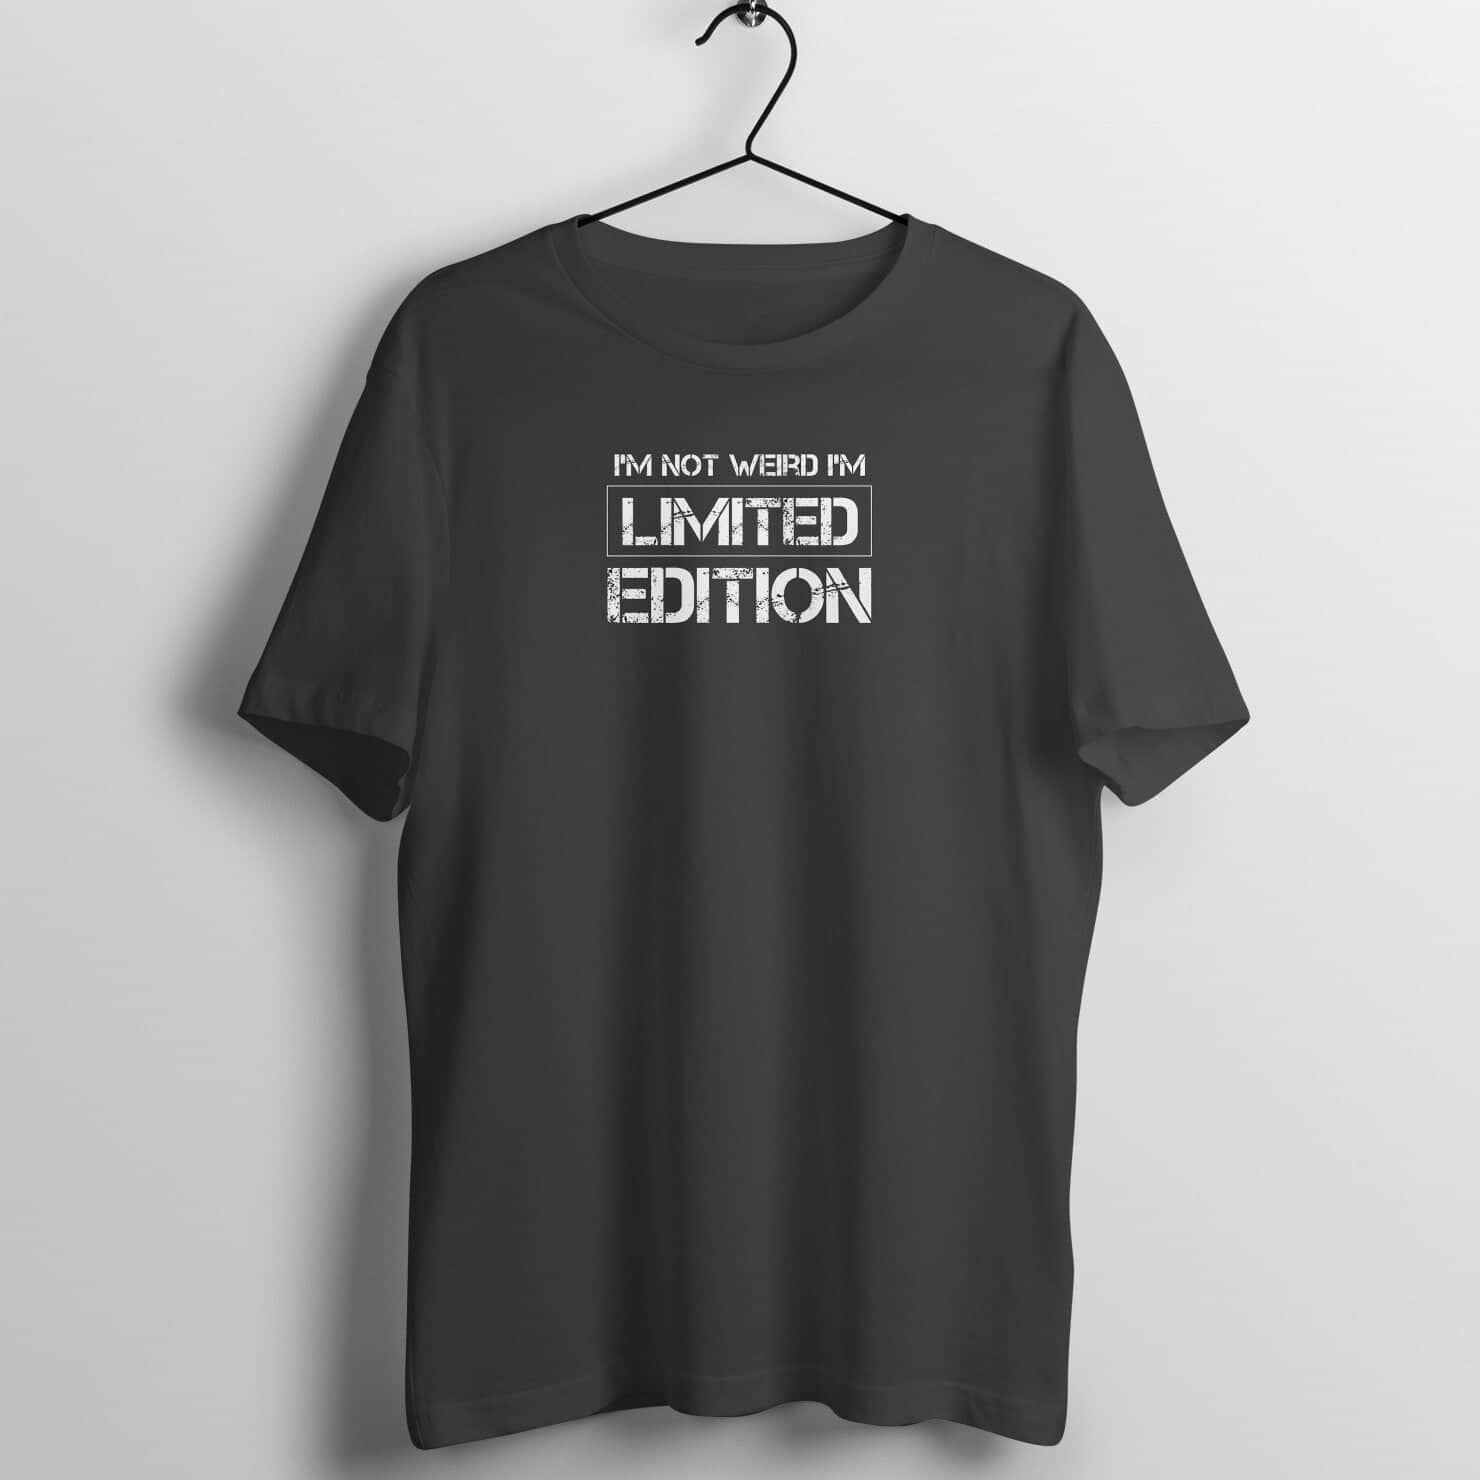 I Am Not Weird I am Limited Edition Exclusive Black T Shirt for Men and Women freeshipping - Catch My Drift India